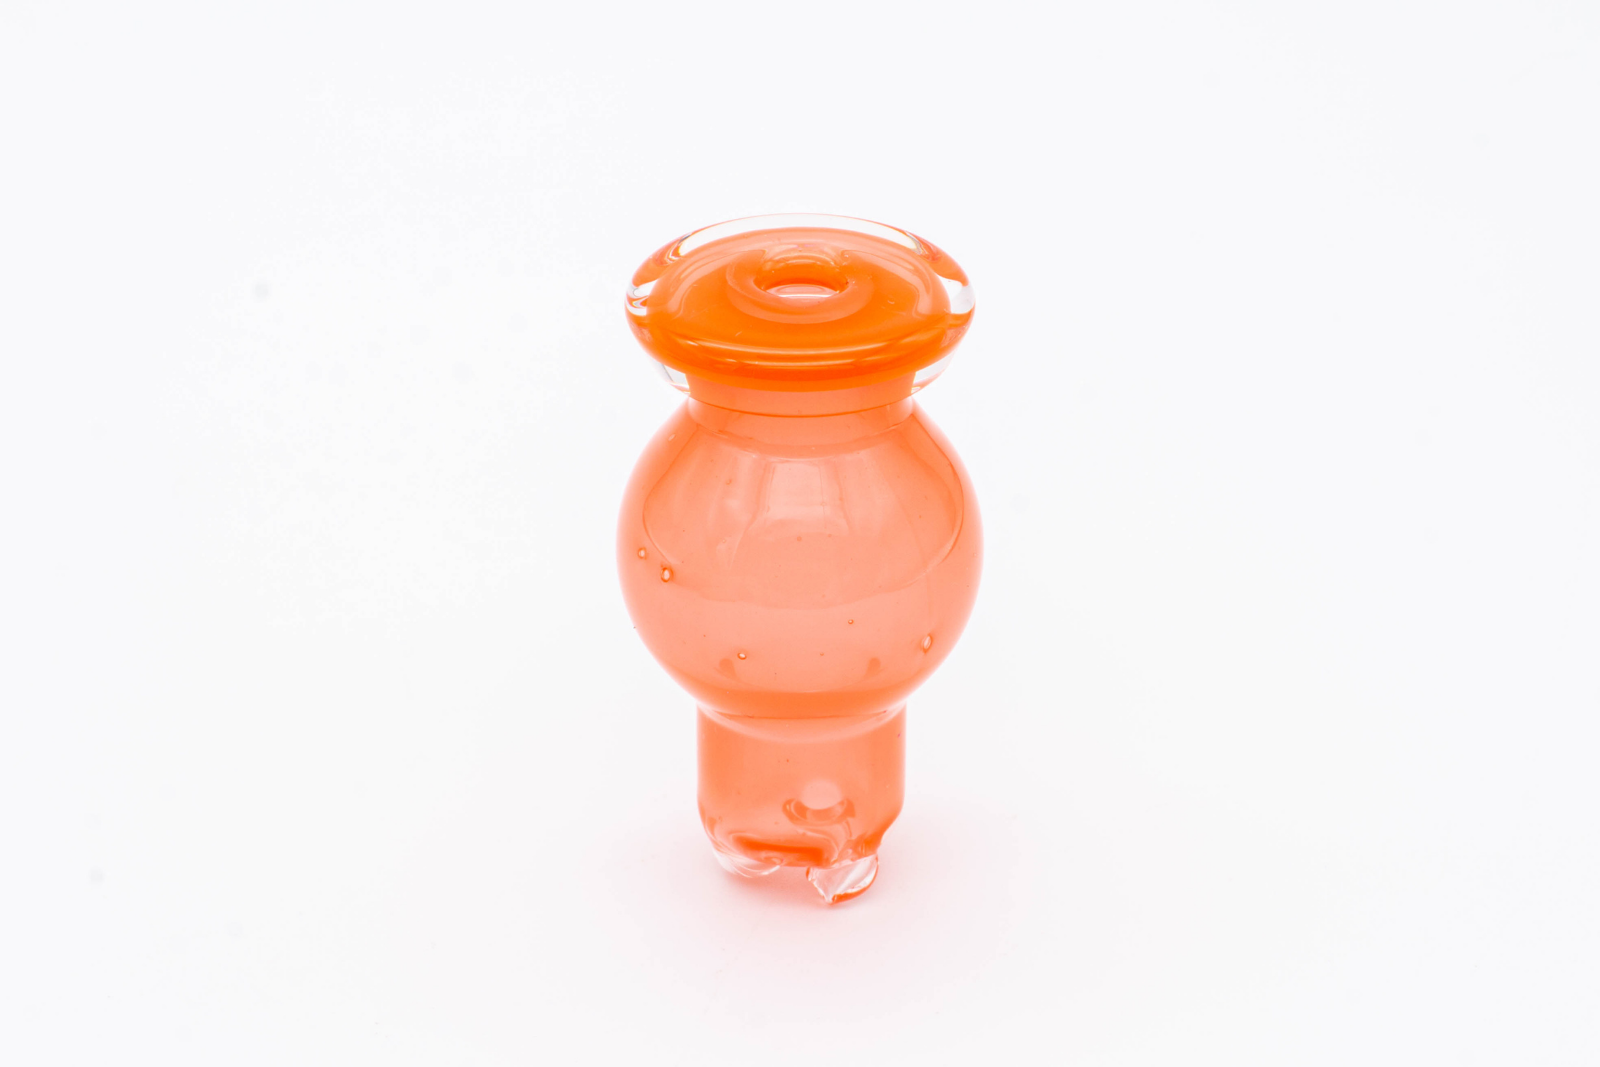 A red spinner bubble cap made by BorOregon, on a white background